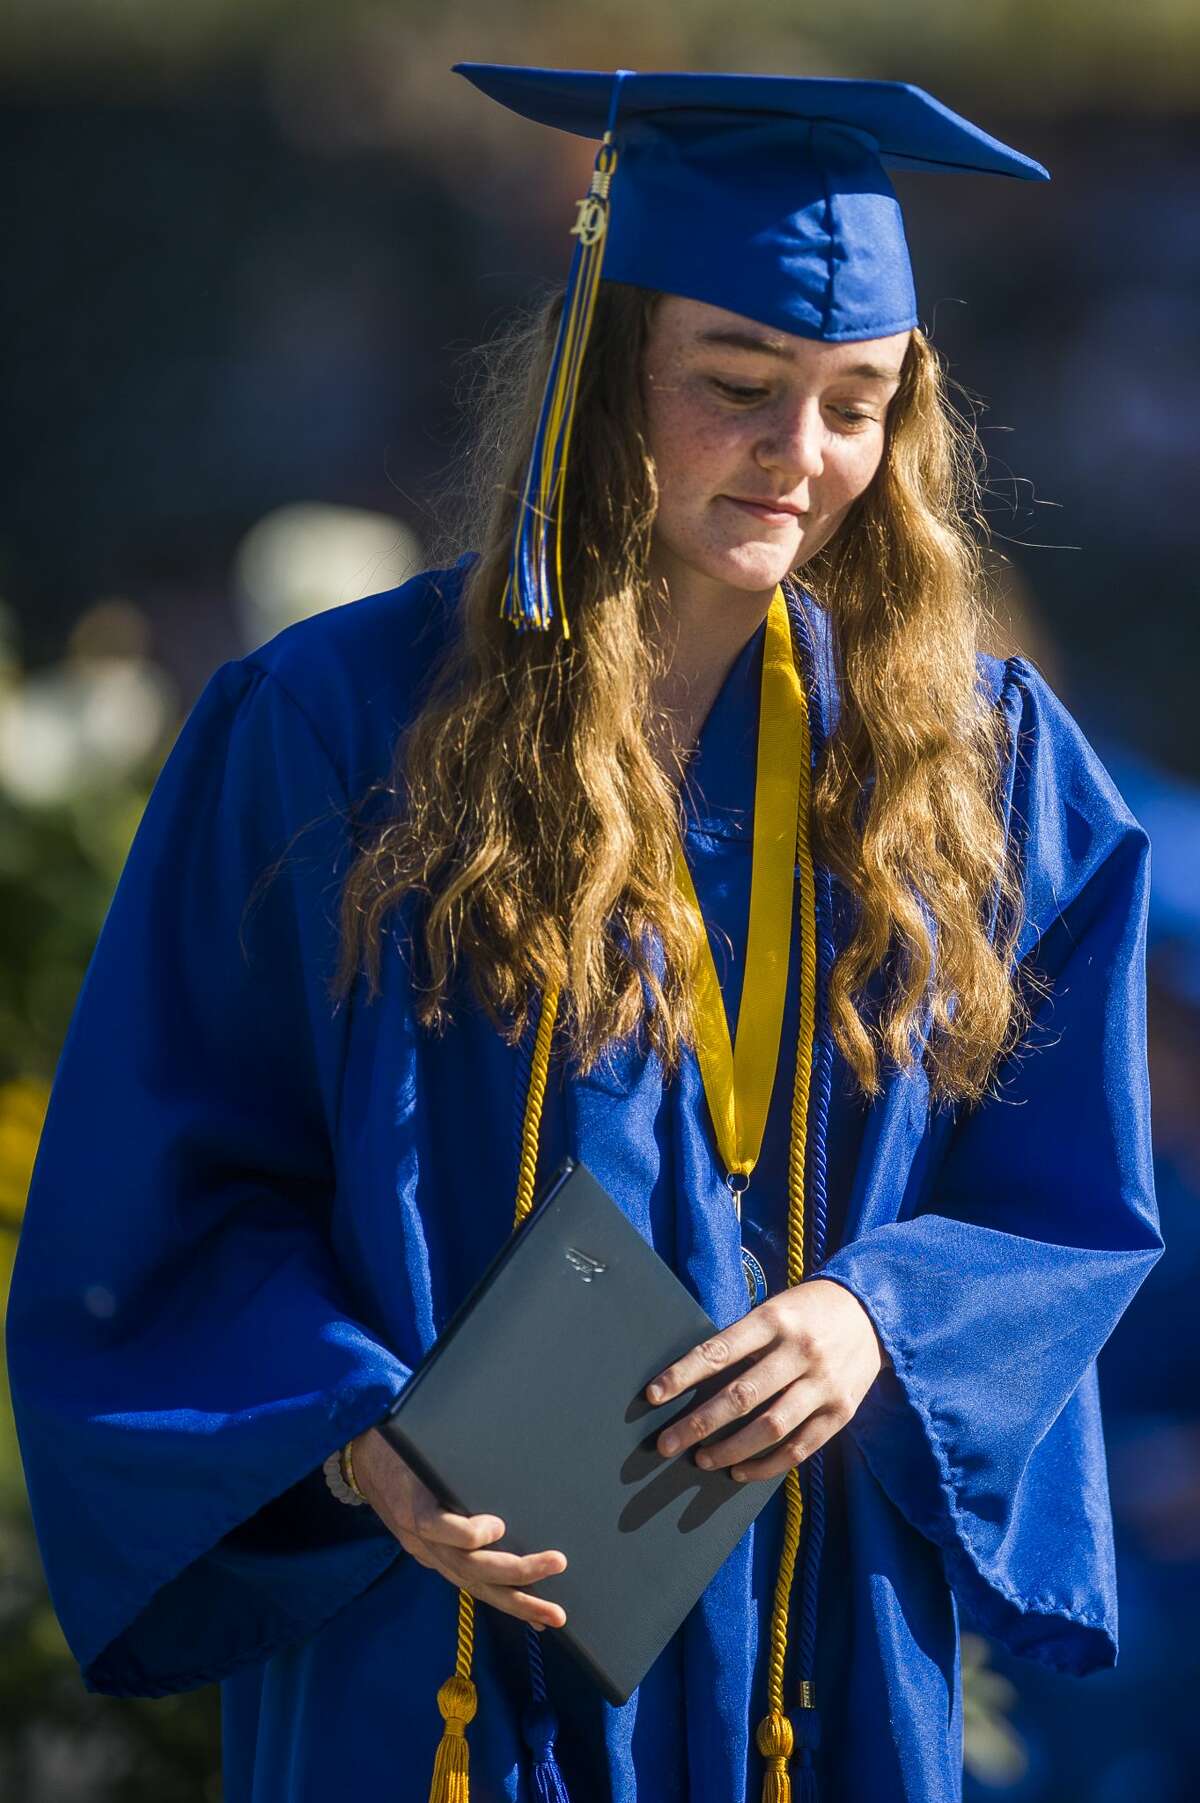 Midland High School Class of 2019 Commencement Ceremony May 29, 2019